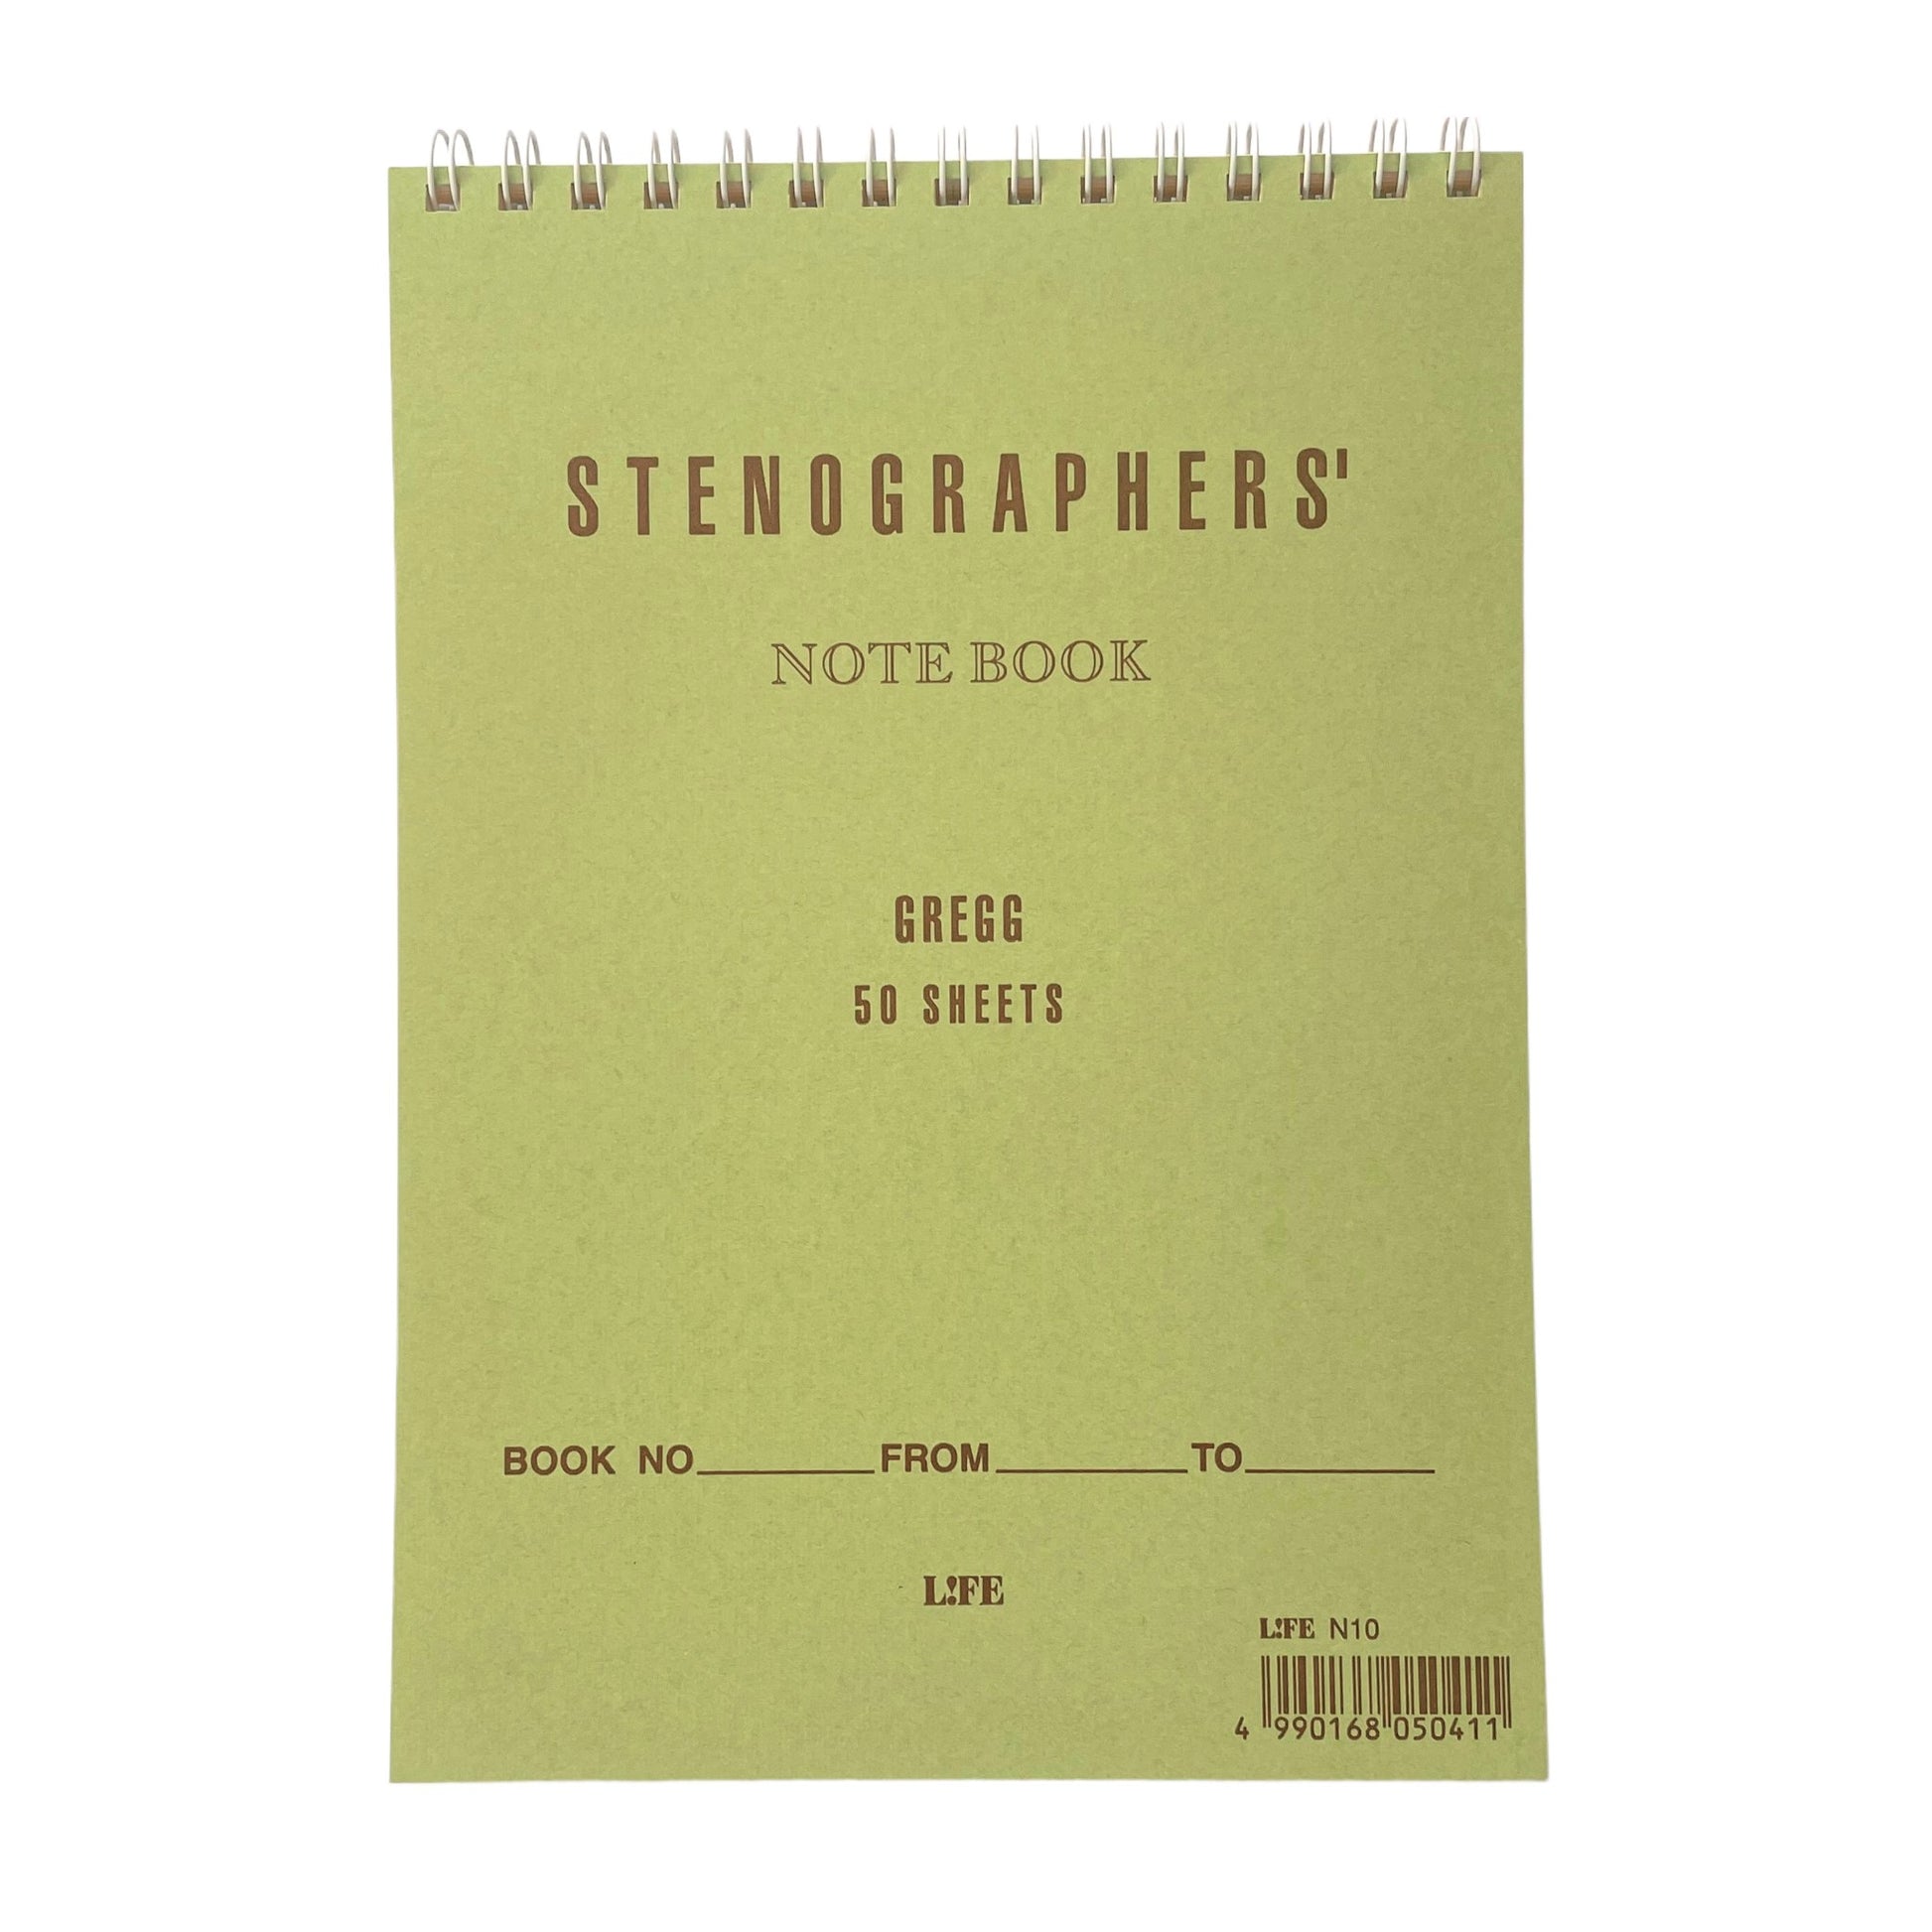 Top ring-bound stenographers' notebook with plain pistachio green cover by Japanese brand Life Japan